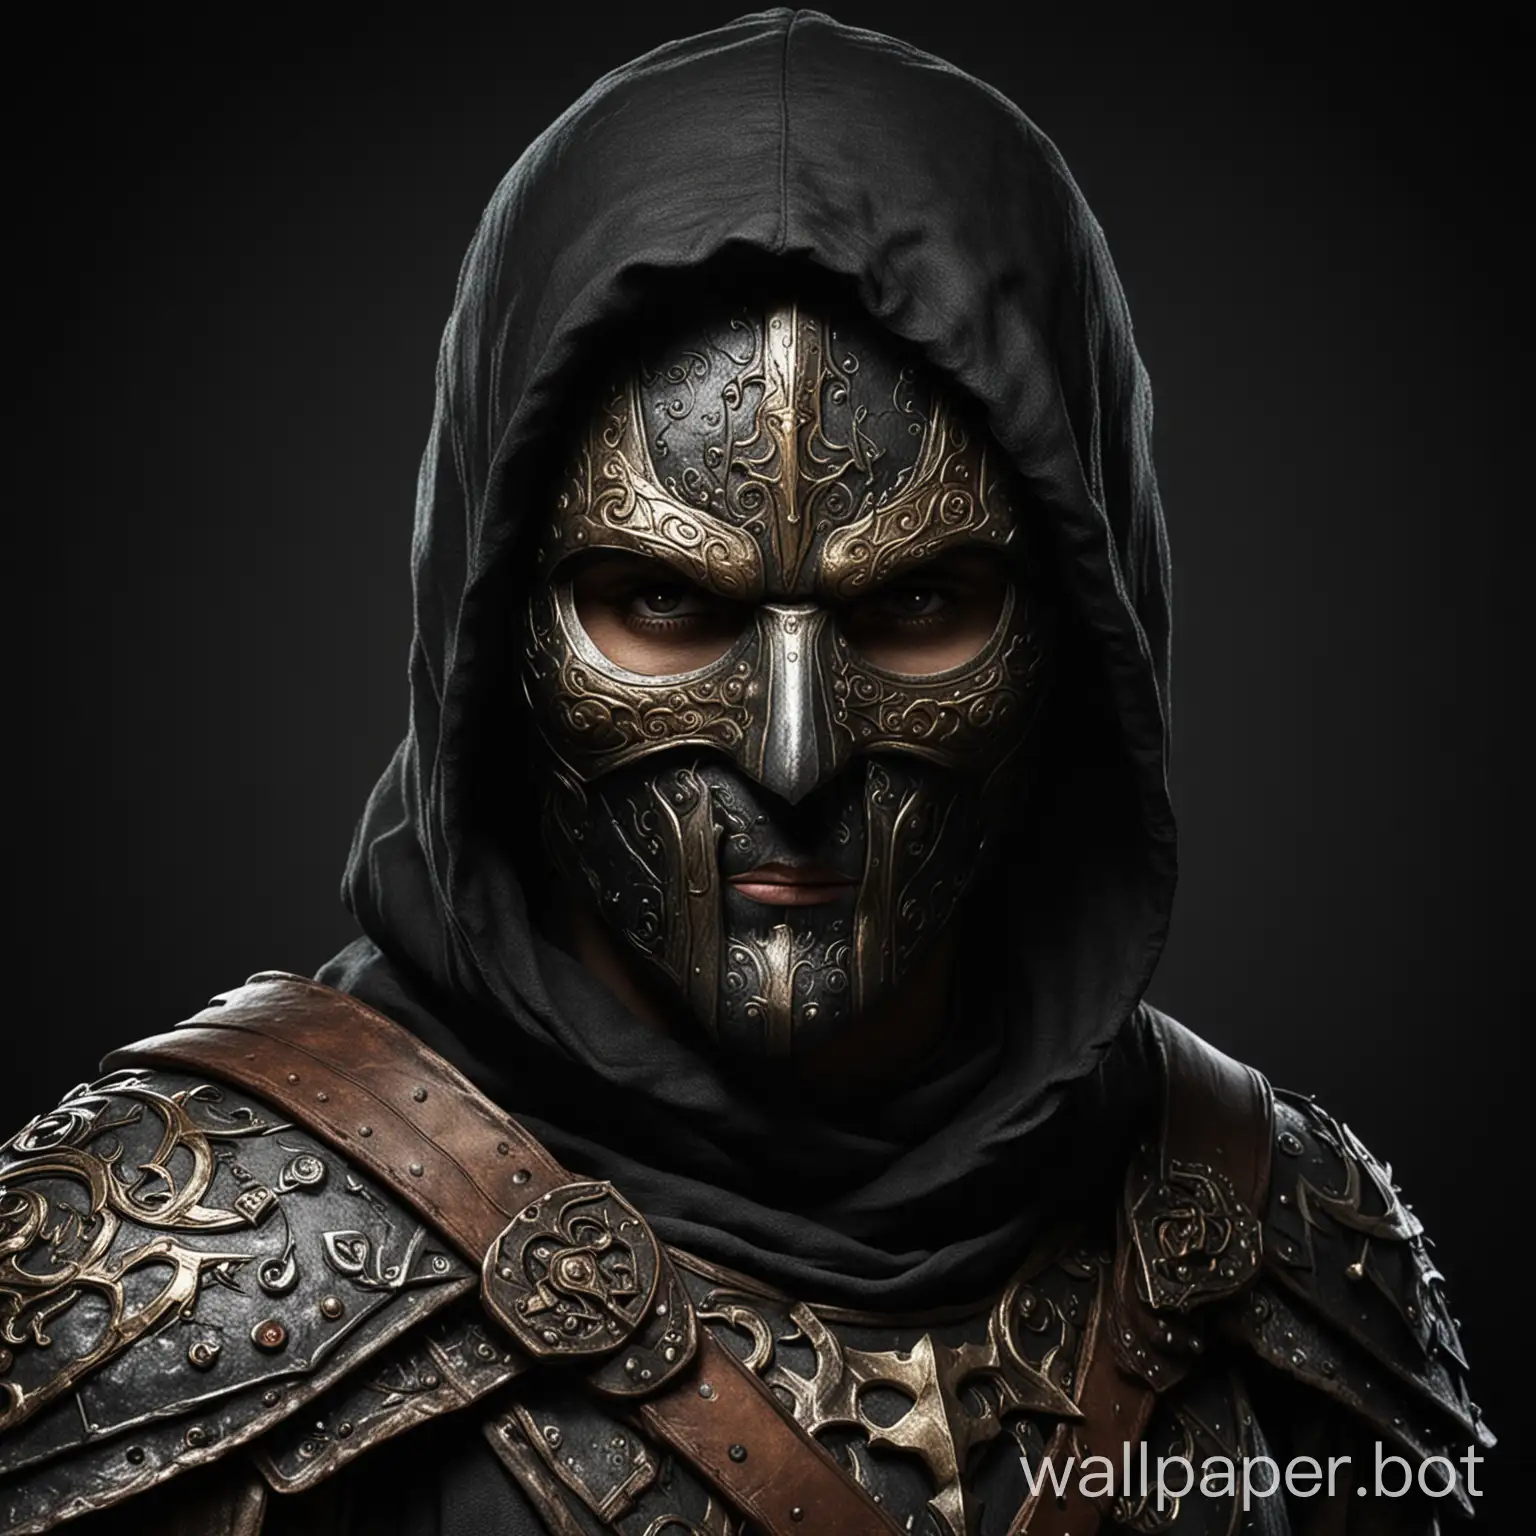 Draw a fantasy medieval avenger hero in a mask on a black background